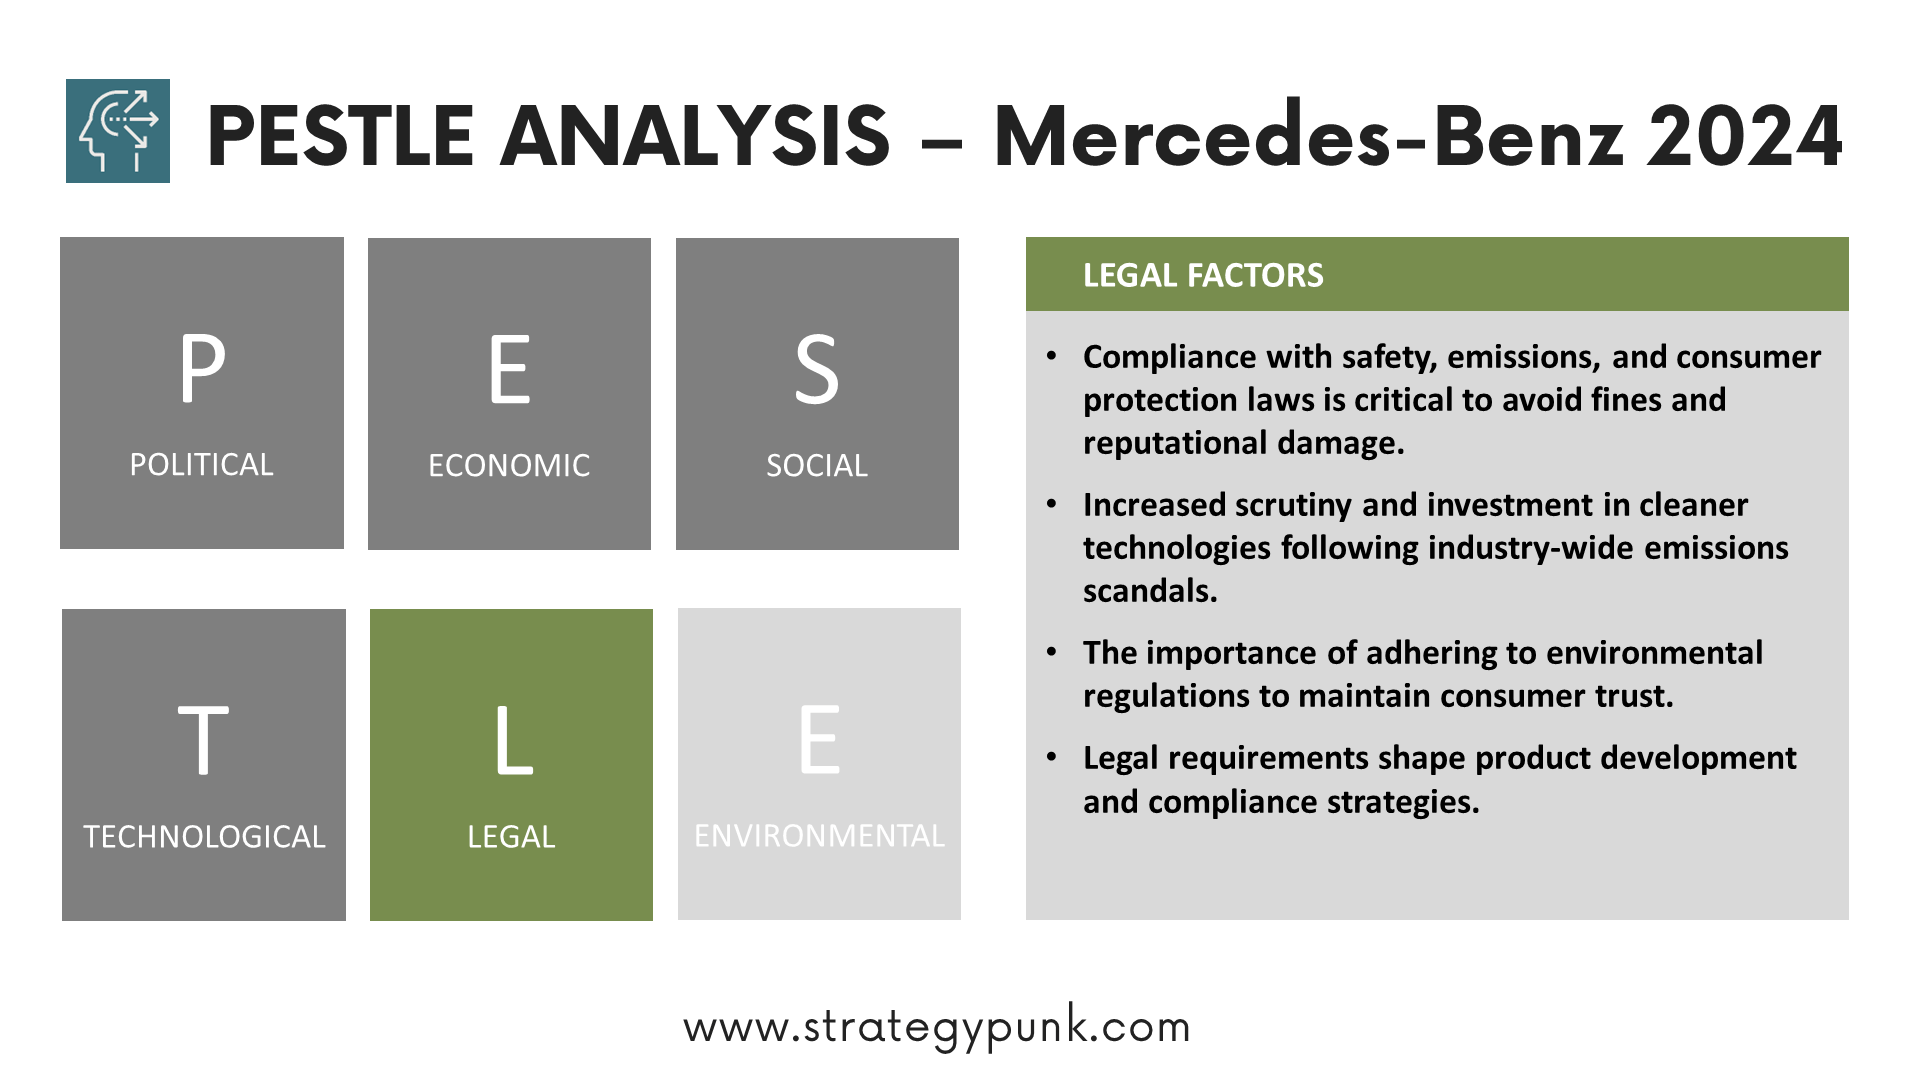 Mercedes-Benz PESTLE Analysis: Adapting to a Shifting Landscape (Free PPT)